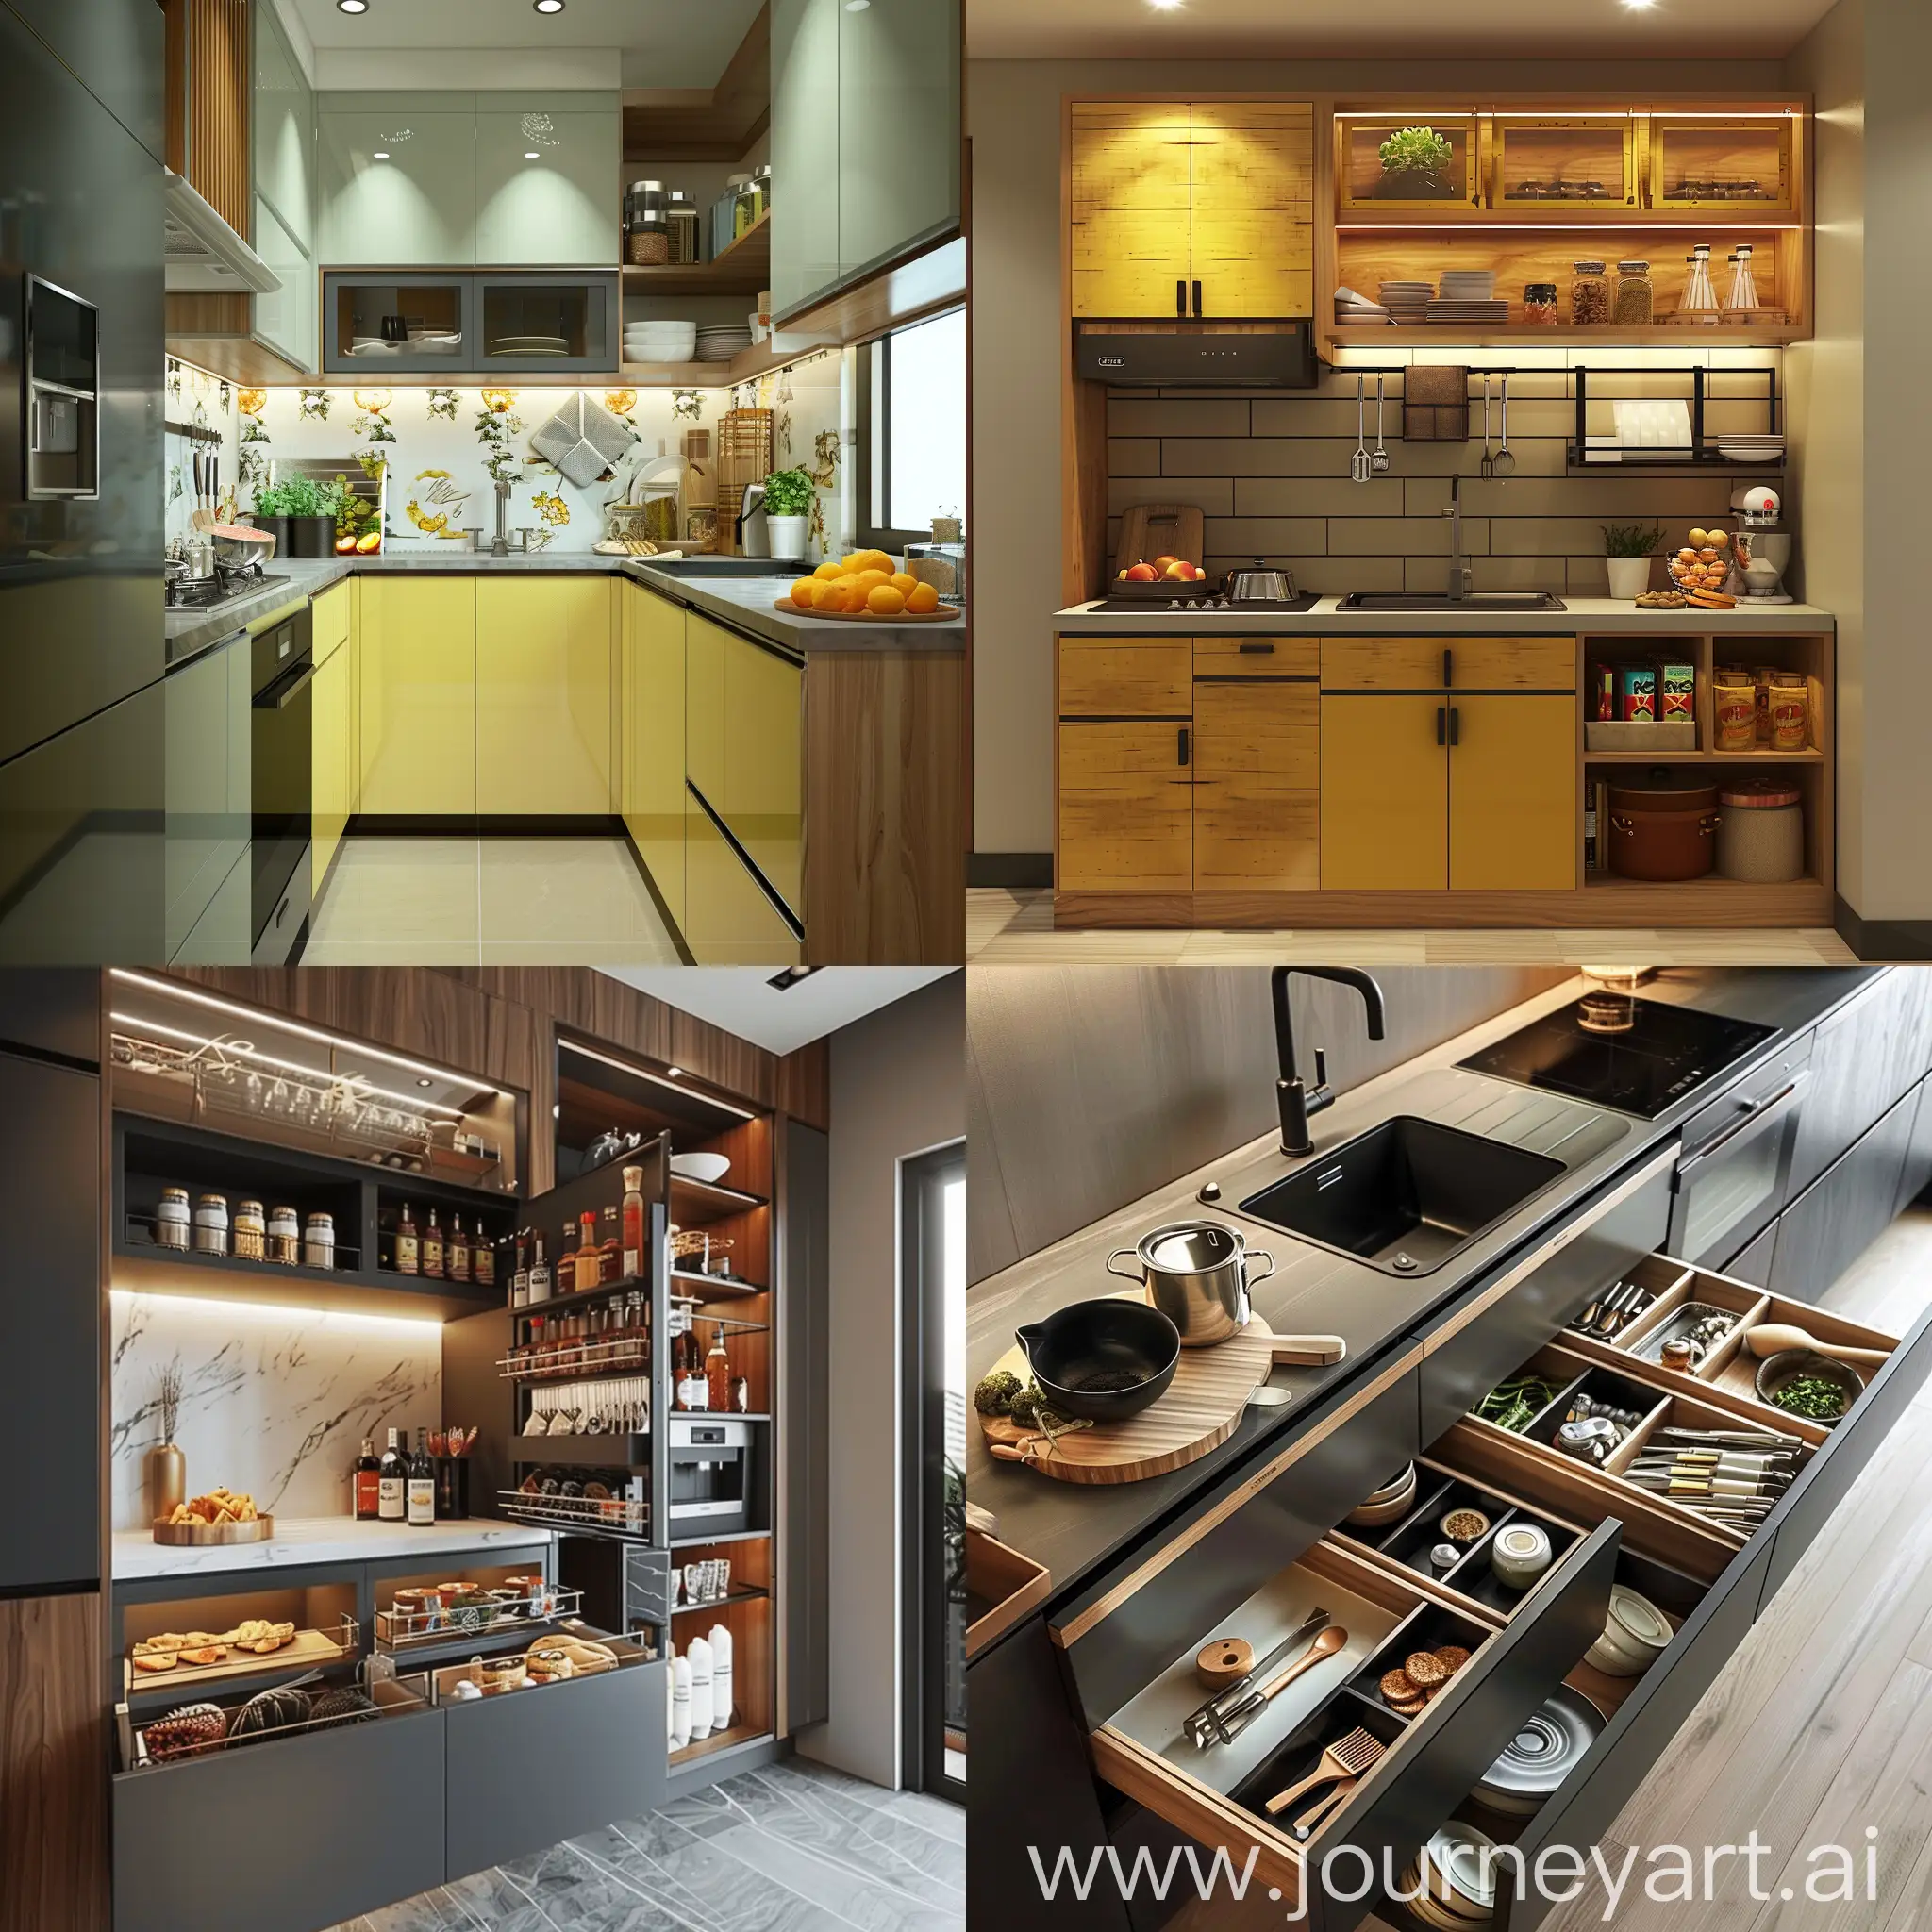 Design a kitchen for the area of 10 sq ft. The kitchen should be easy to operate and store several items such as snacks and utensils